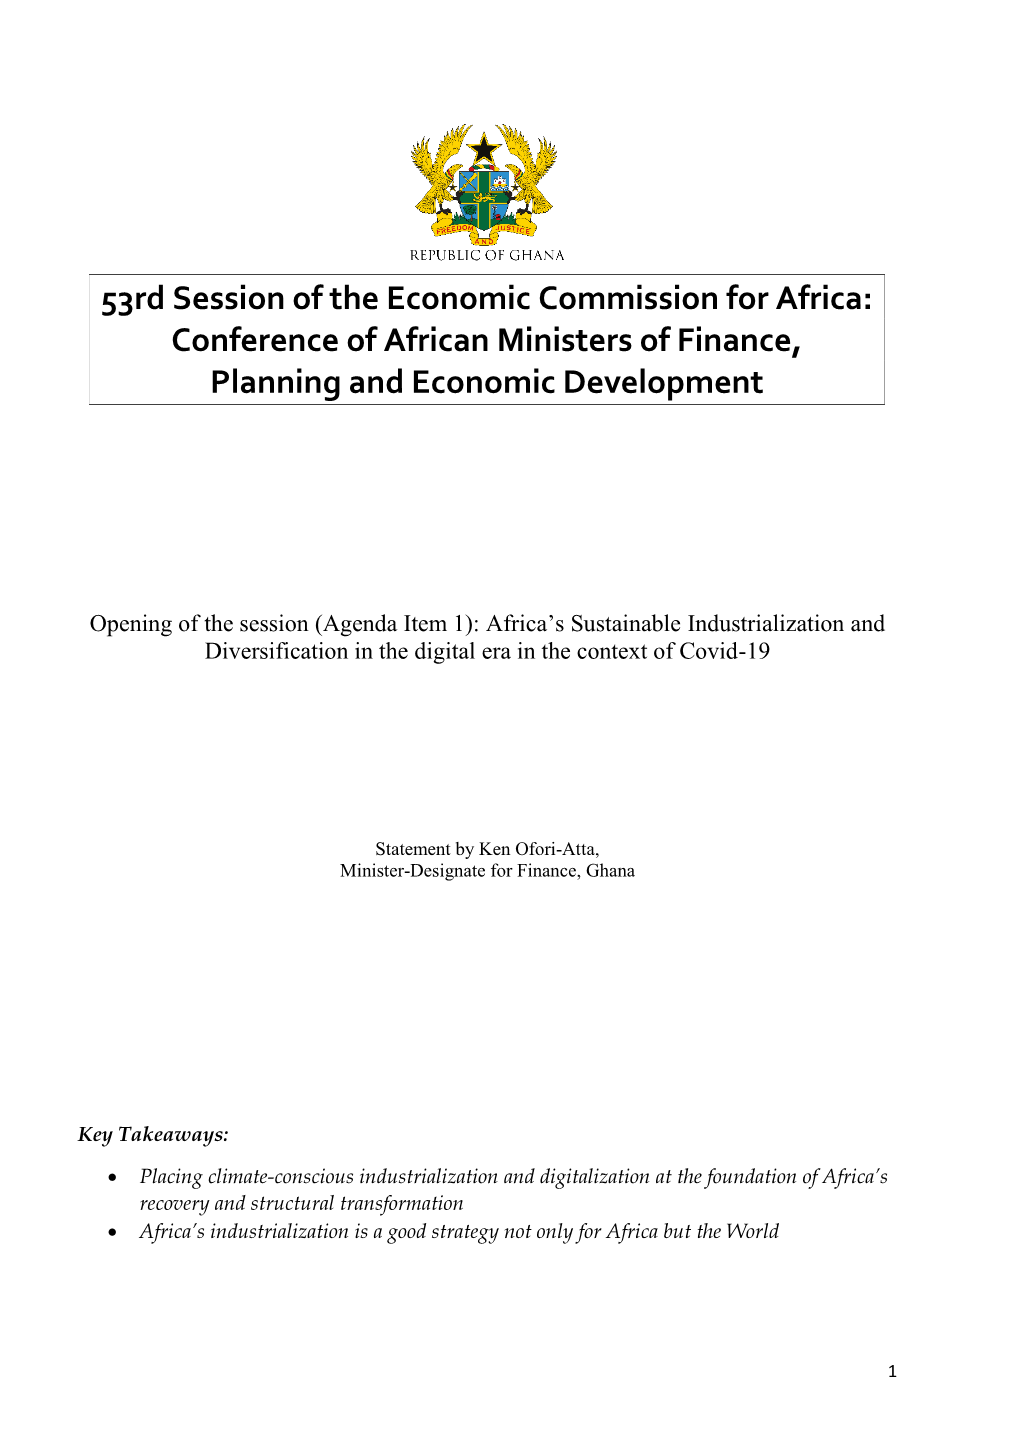 Conference of African Ministers of Finance, Planning and Economic Development